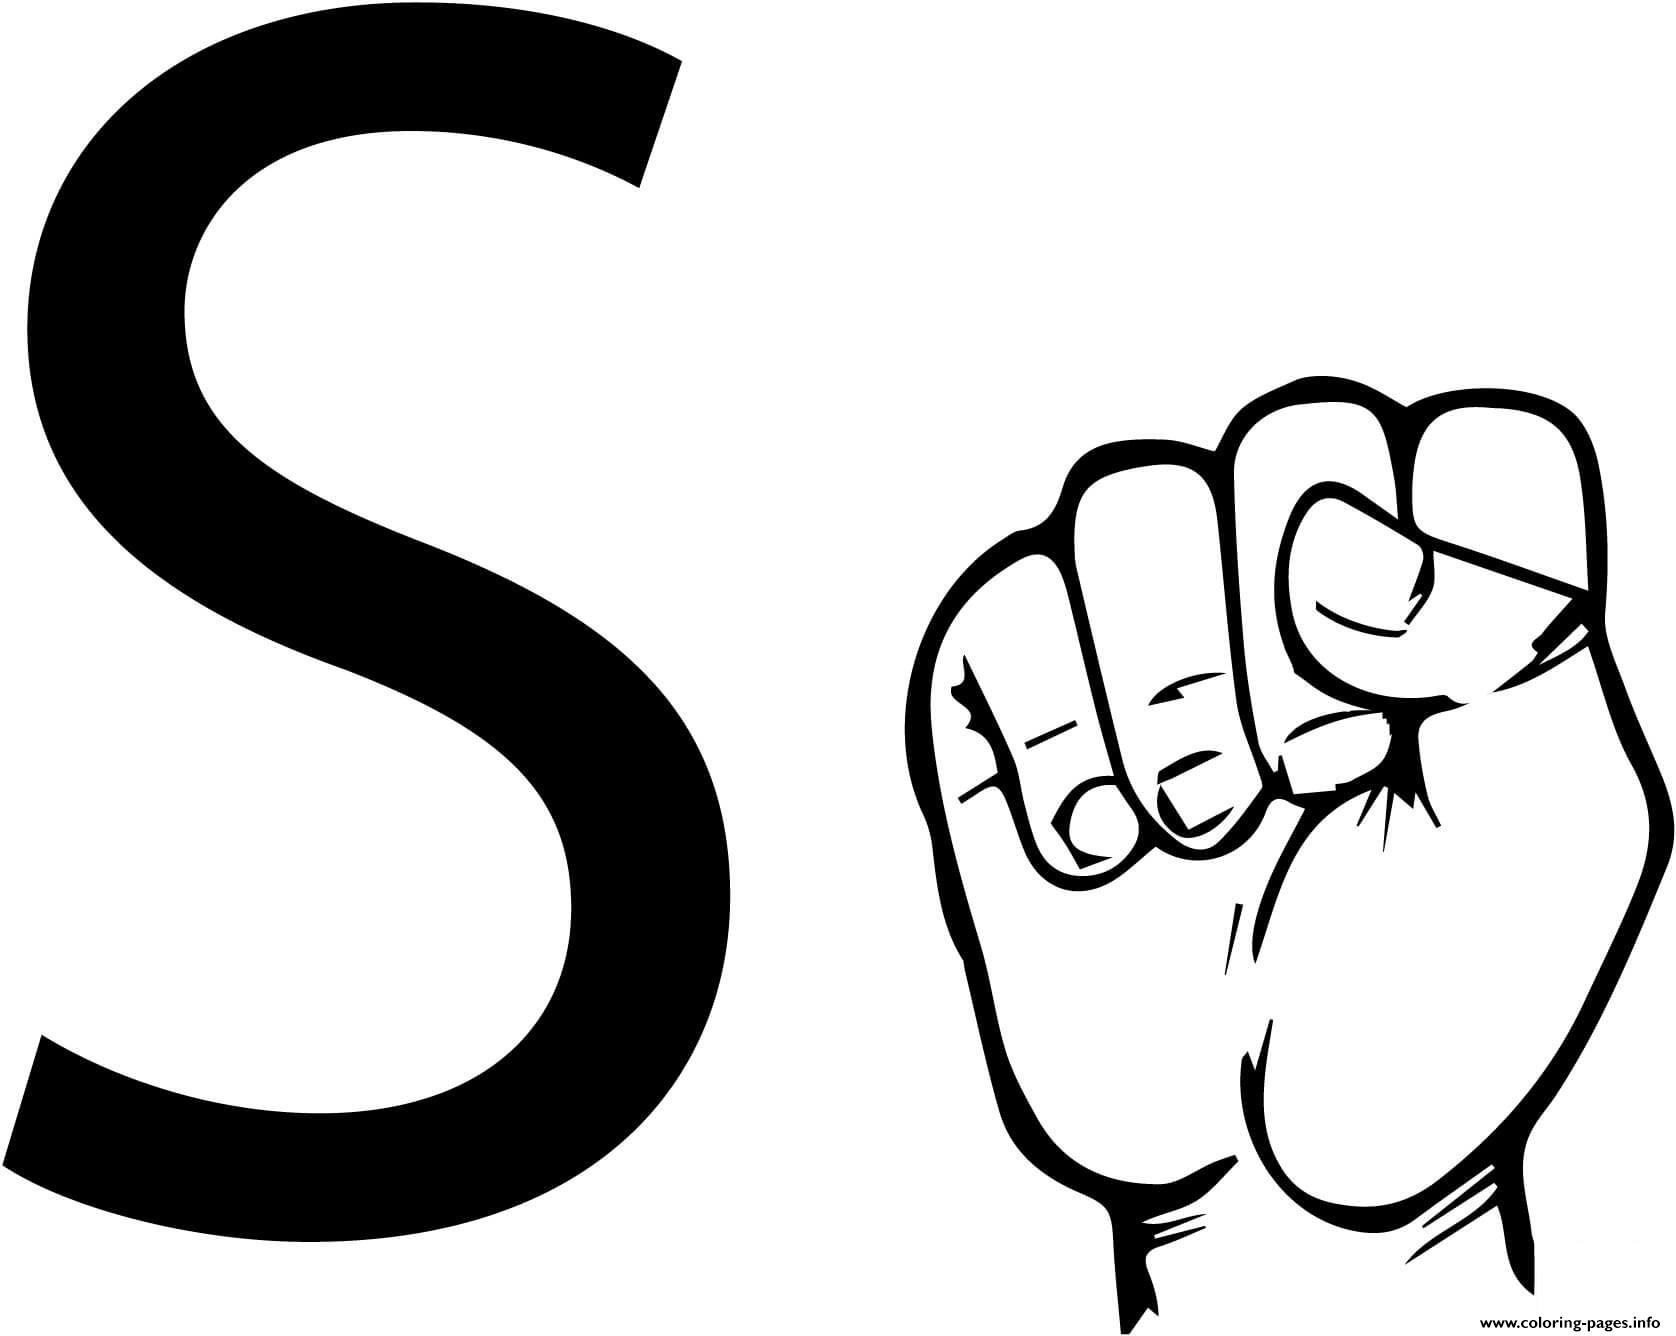 asl-sign-language-letter-s-coloring-page-printable